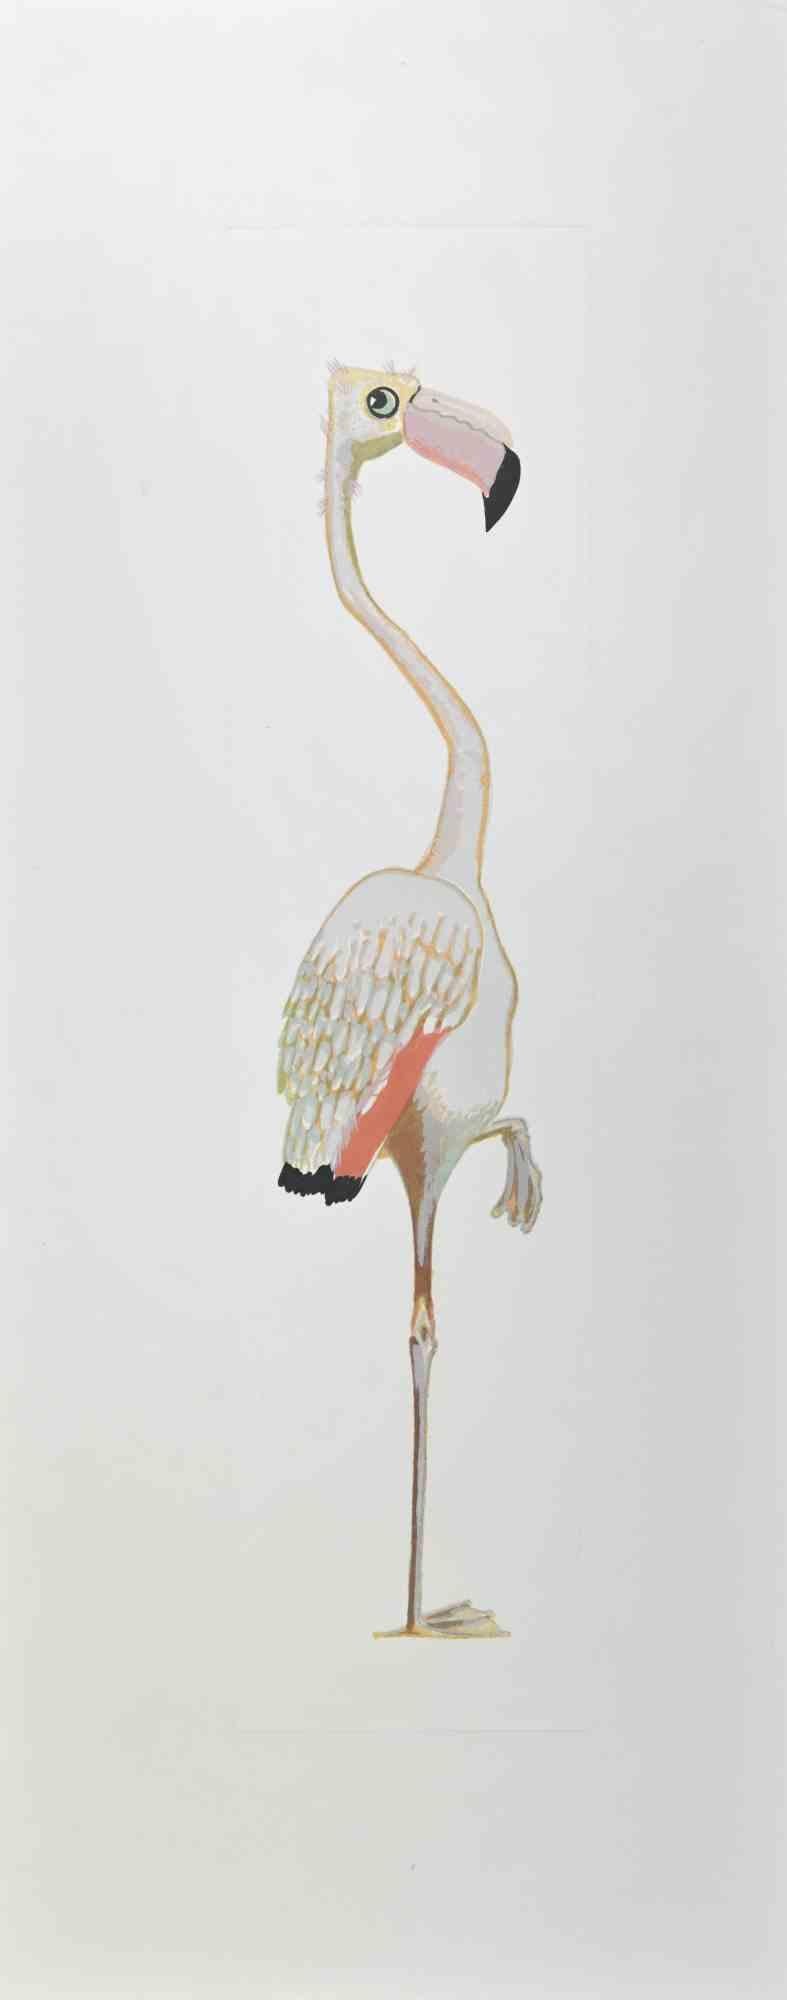 Flamingo is a lithograph realized by Alberto Mastroianni in the 1970s. 

The artwork represents an interesting pink flamingo, a combination of fantasy and realism.

The artist's efforts indicate the perfect applying of aesthetic features.